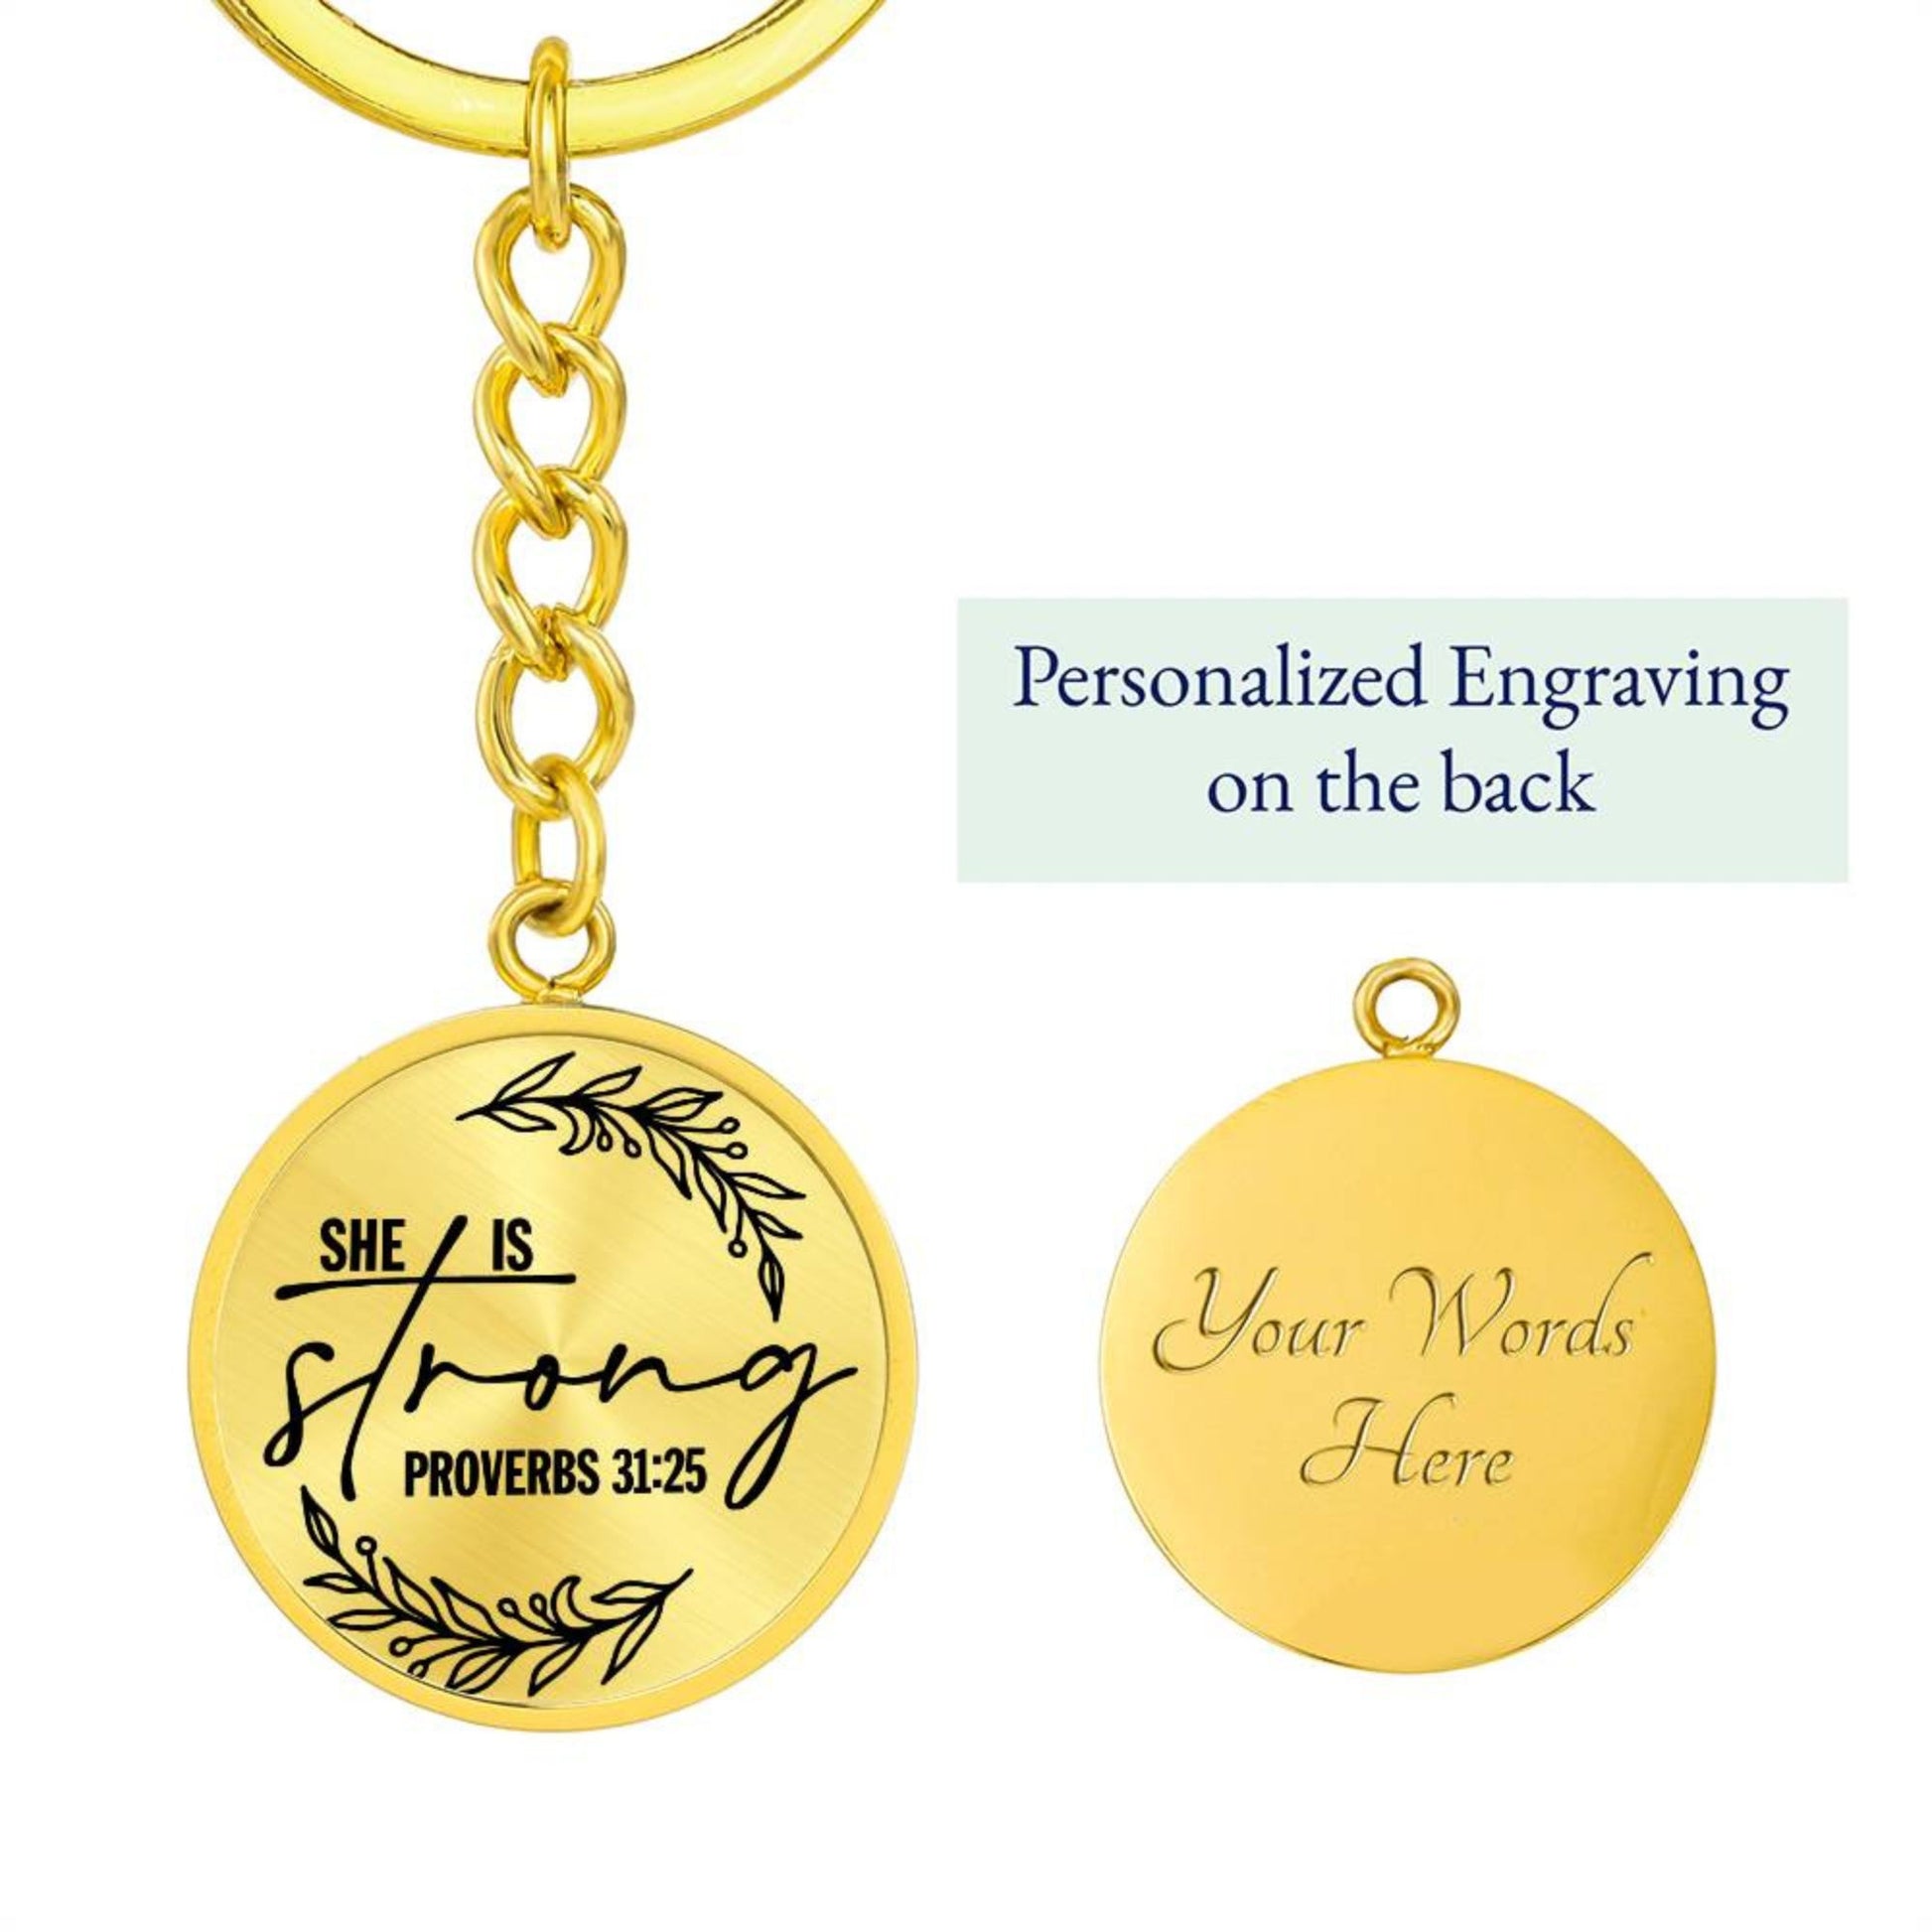 She is Strong Proverbs 31:25 Daily Encouragement Keychain Engraving: Yes Jesus Passion Apparel